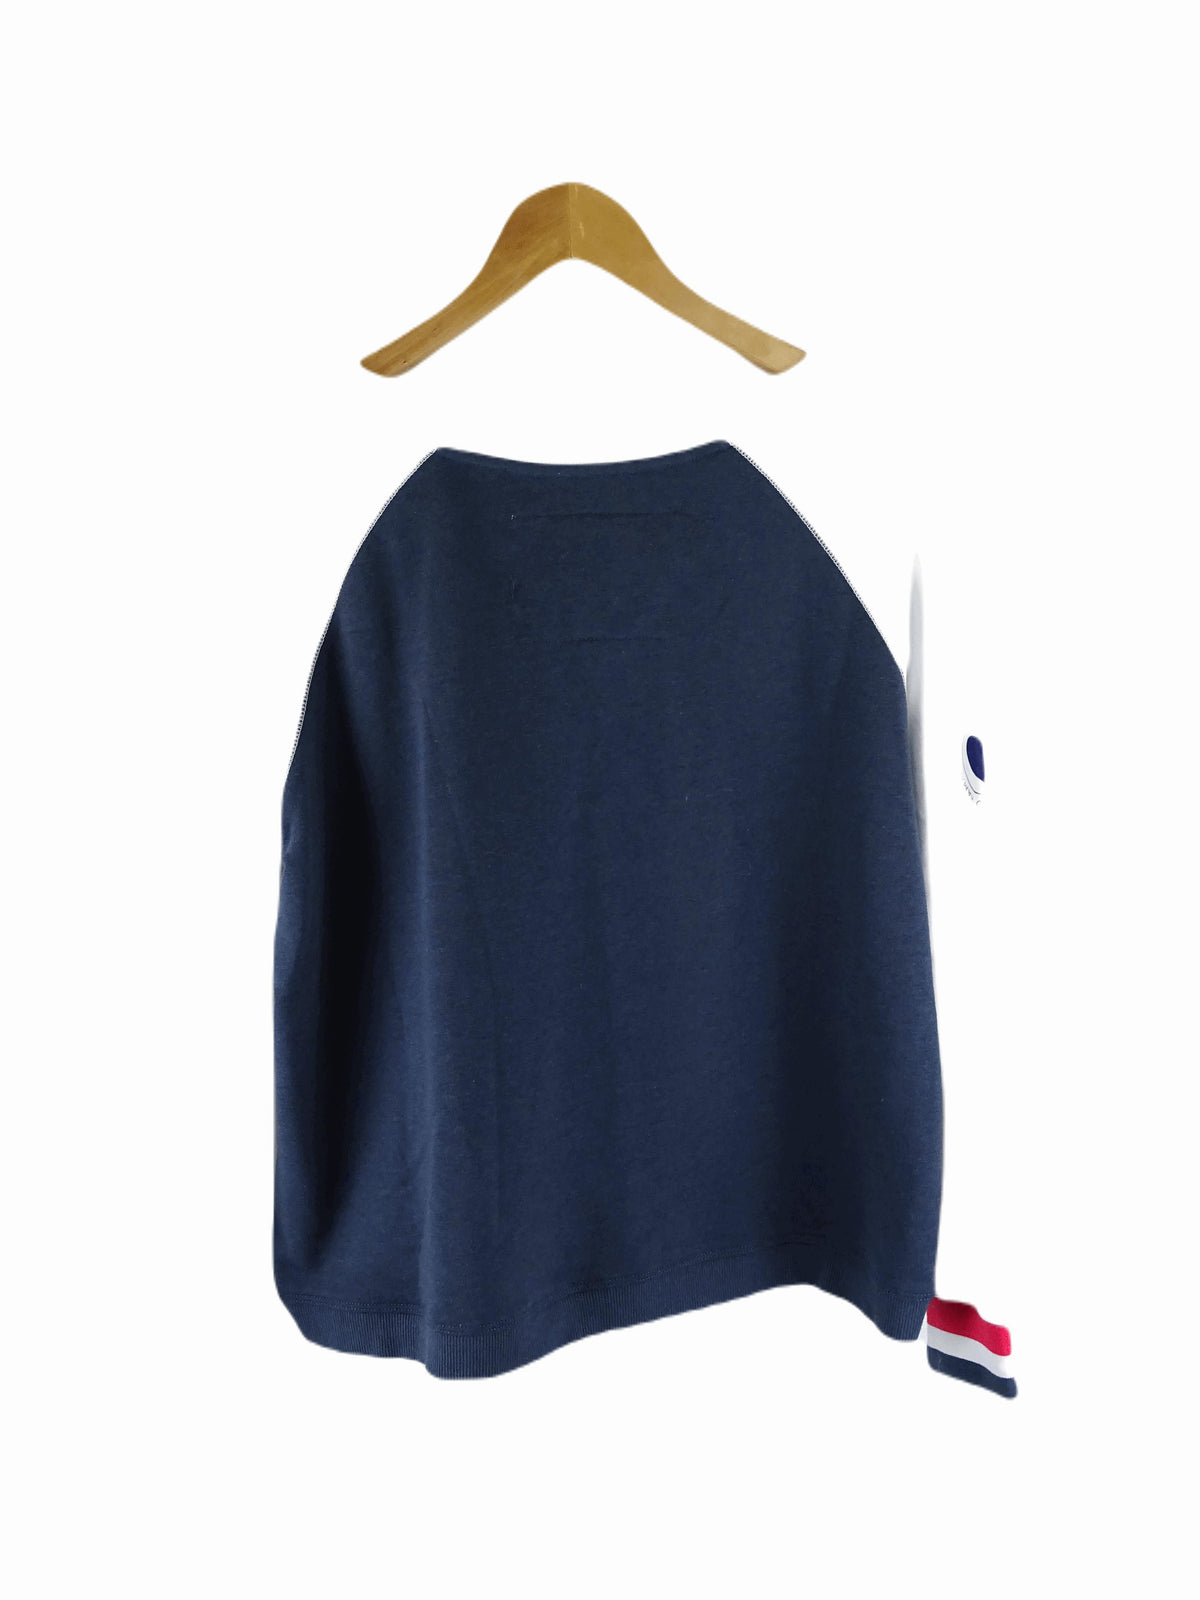 Hammill &amp; Co White and Navy Sweater S